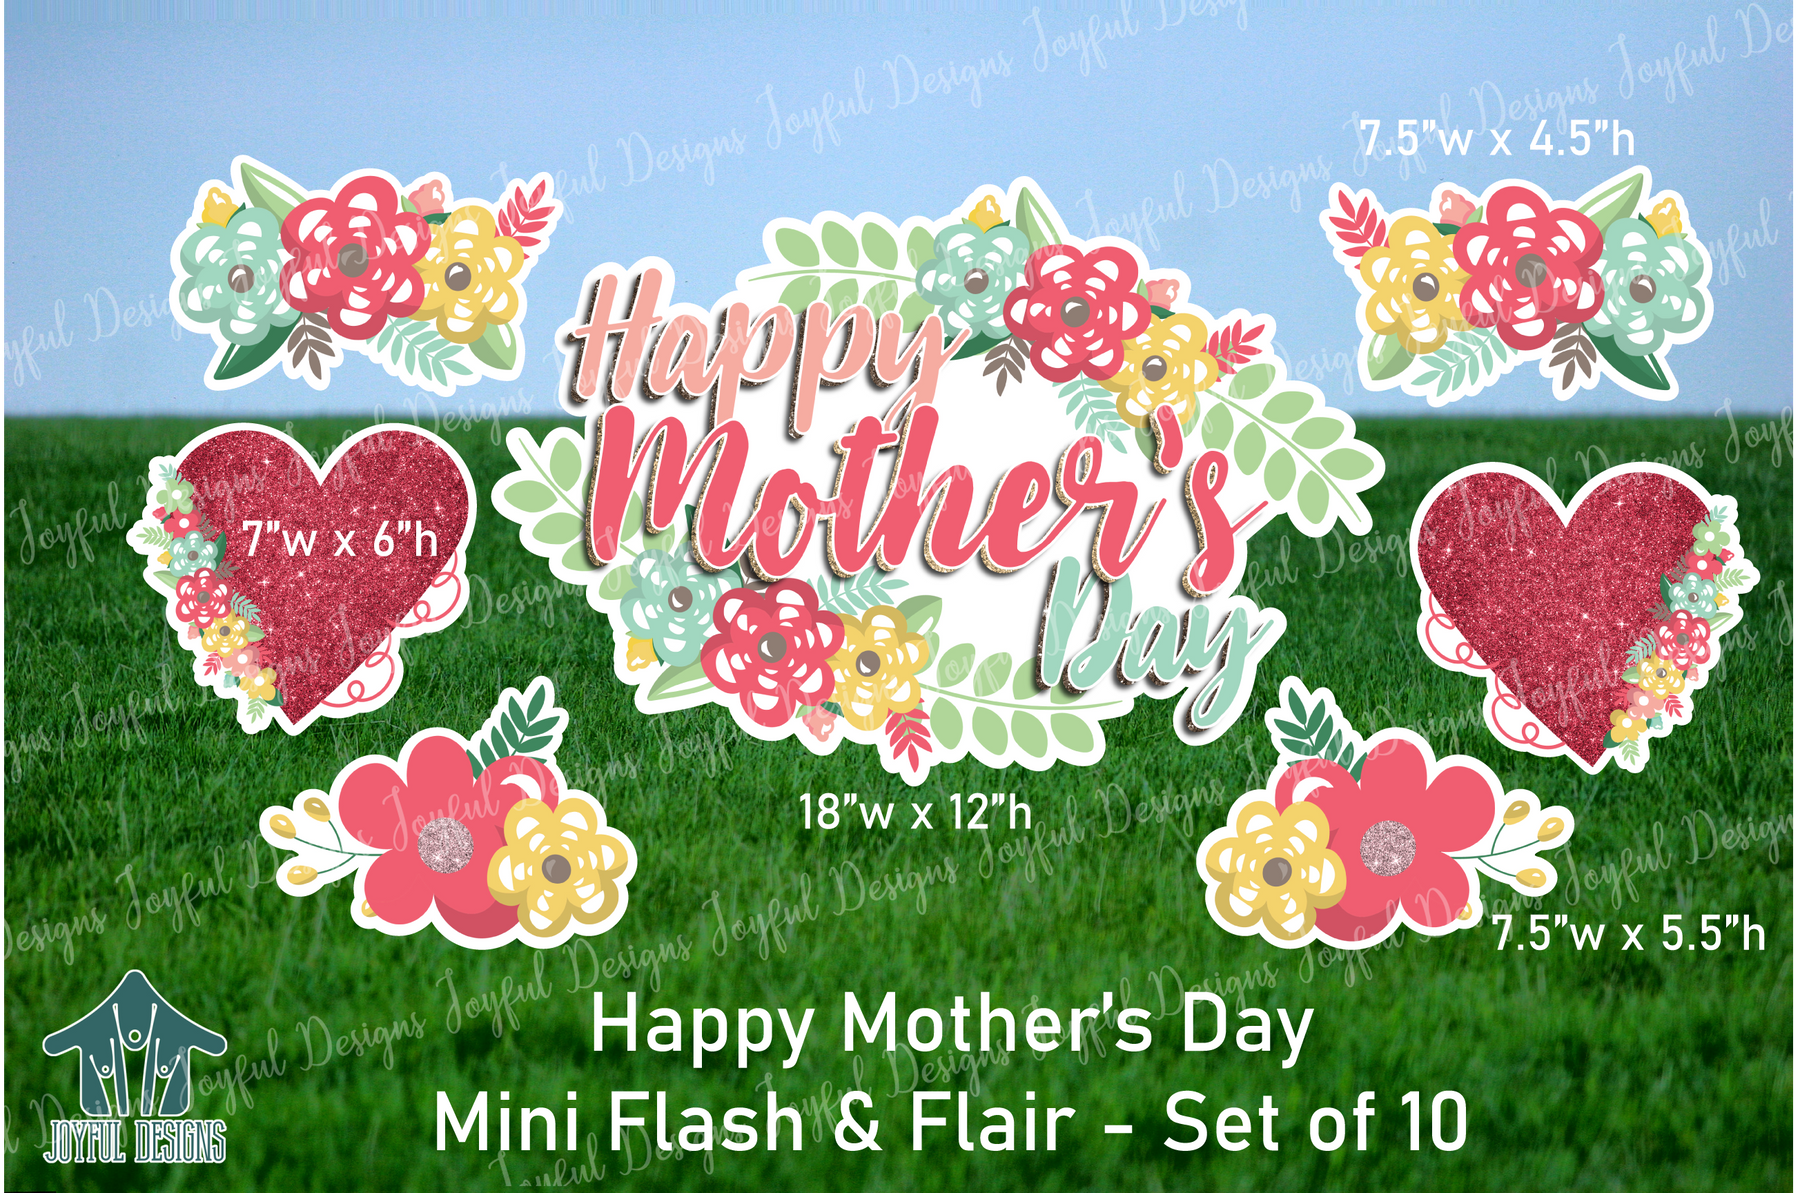 Mother's Day Mini Centerpiece & Flair - 10 Sets